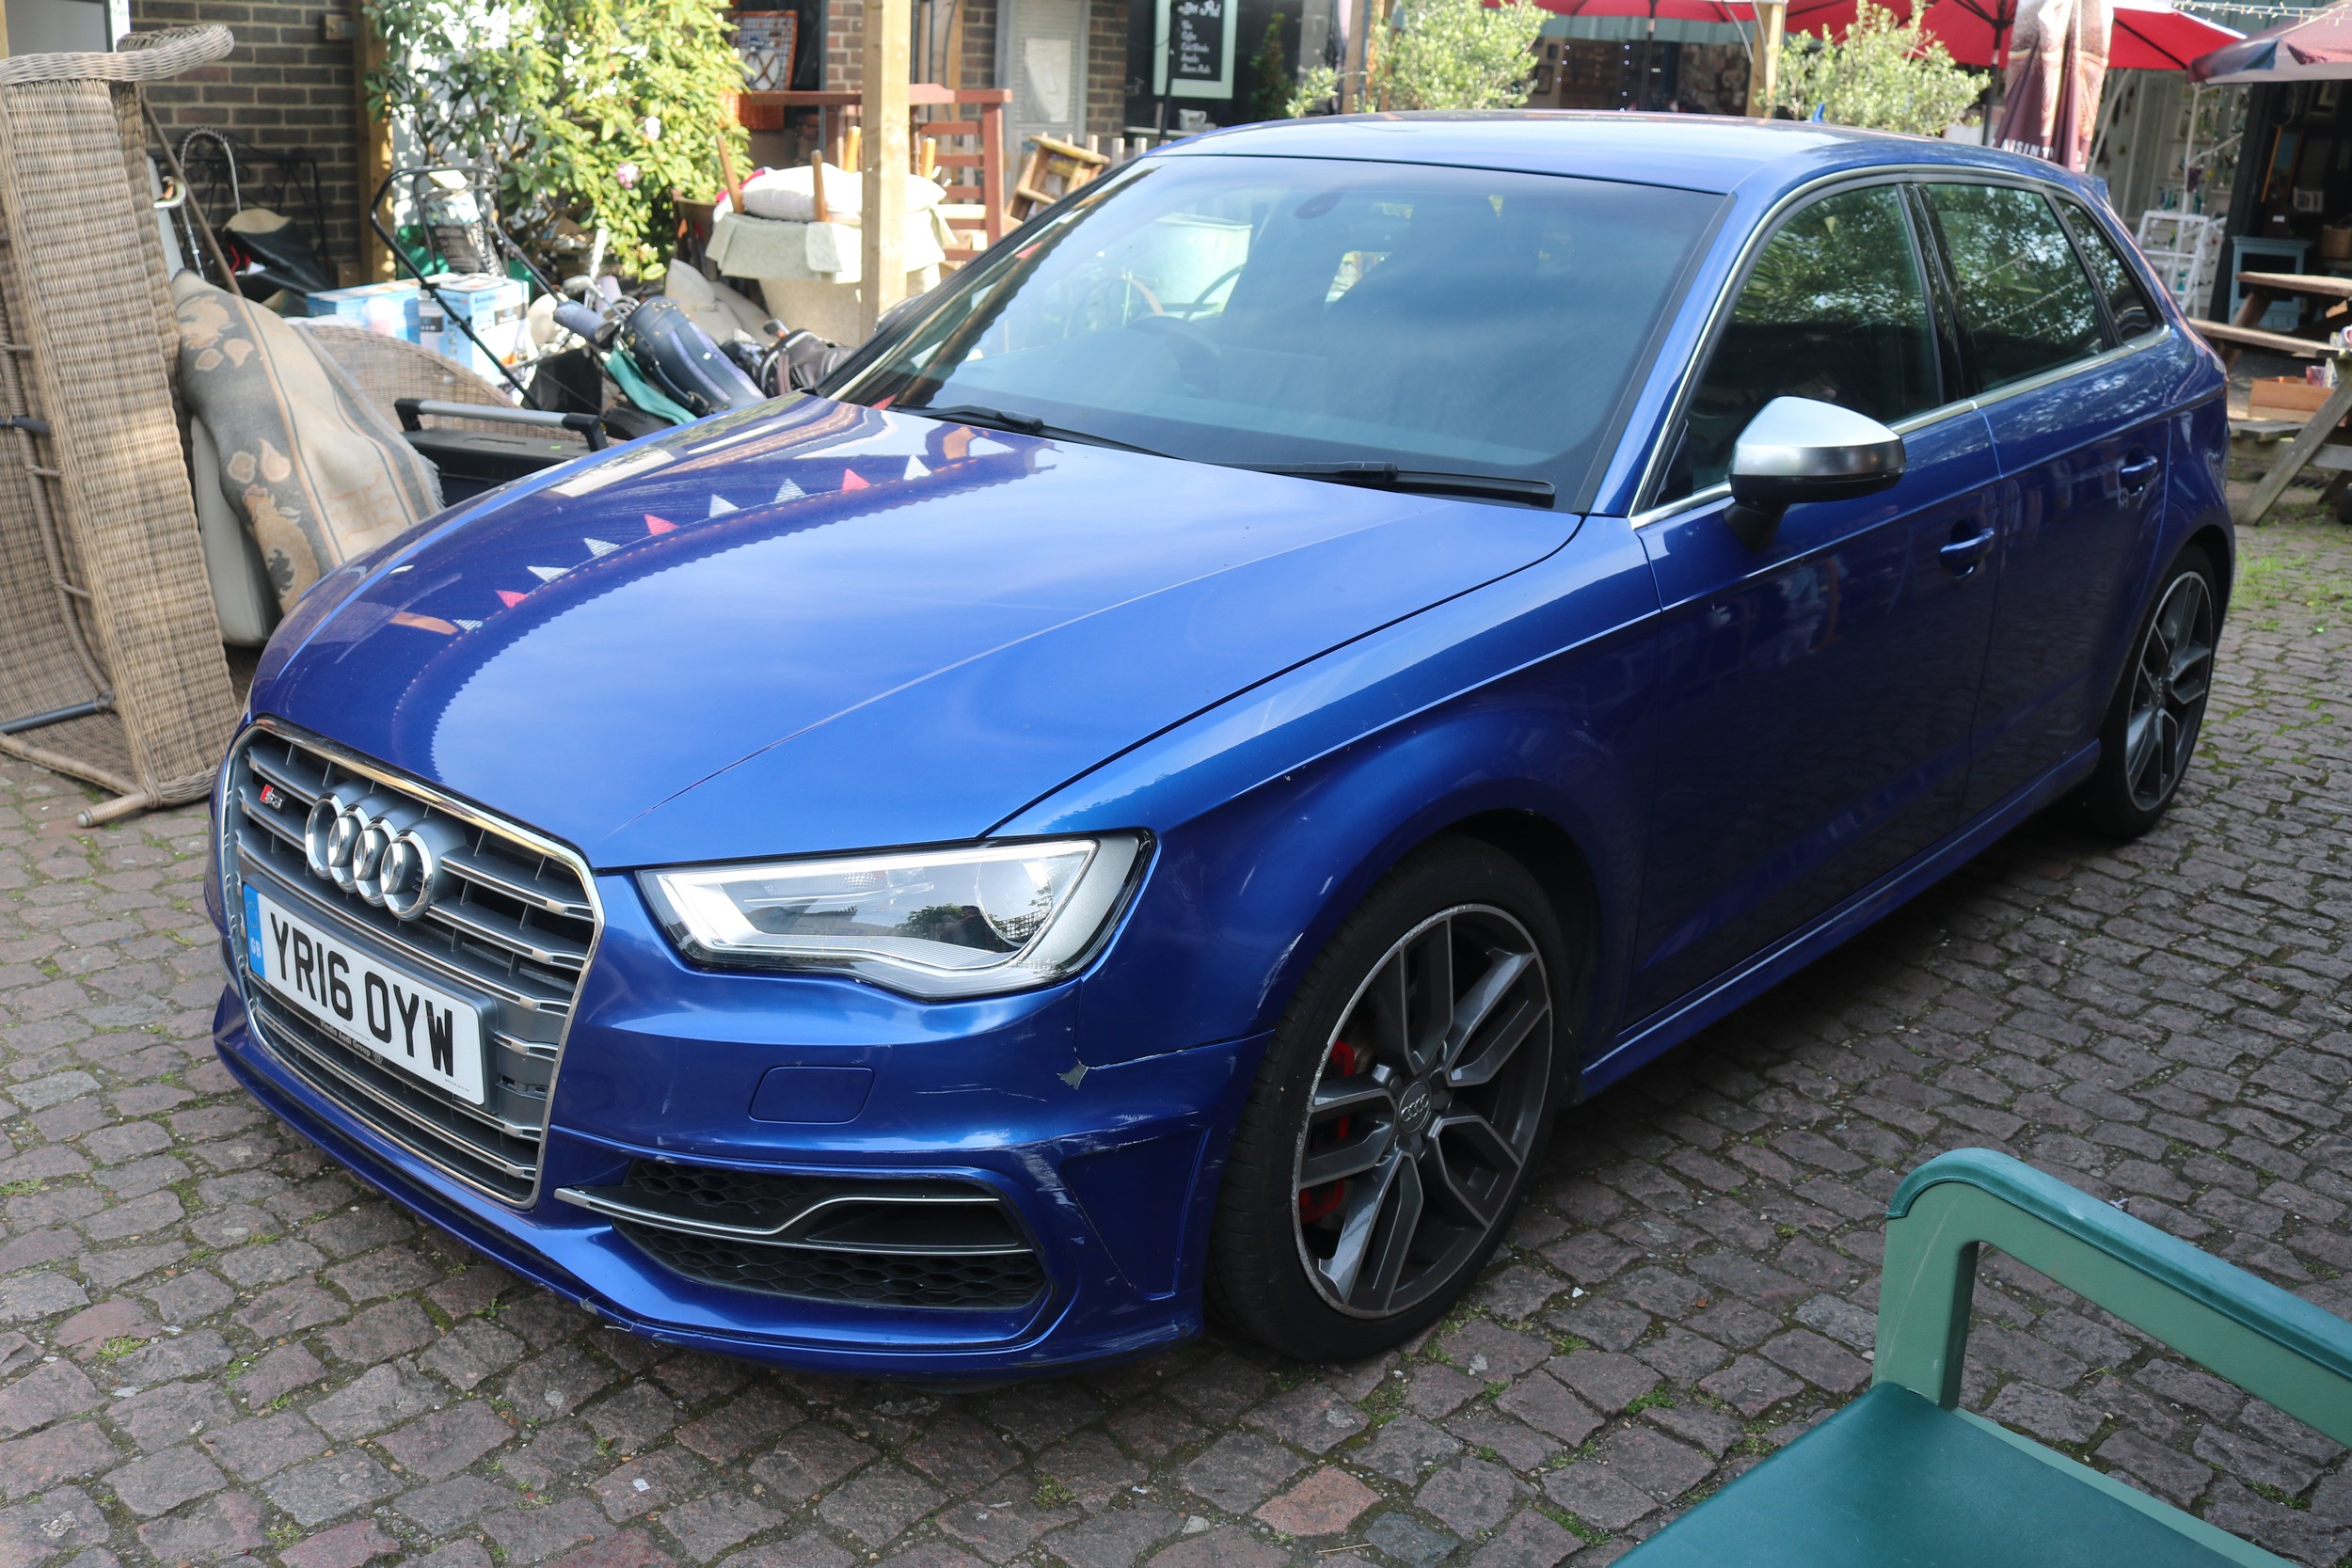 Audi A3 Sportback S3 TFSI Quattro 5dr S Tronic (Nav) 2016 Blue Automatic 2 Litre with 3 Keys Logbook - Image 3 of 18